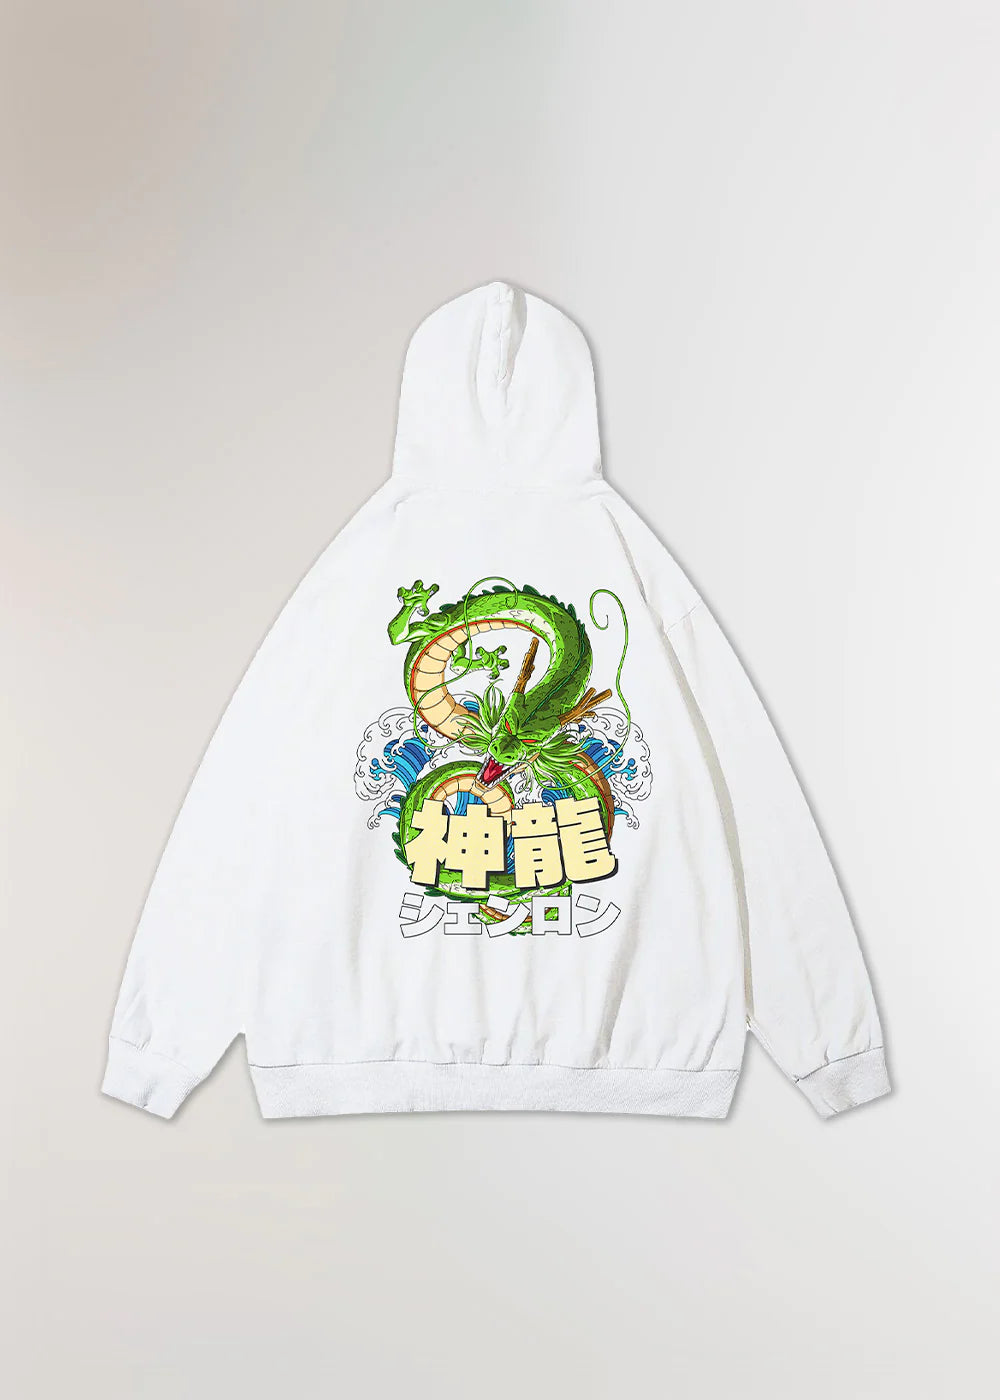 MADE IN JAPAN - DRAGON GOD® OVERSIZE WHITE HOODIE